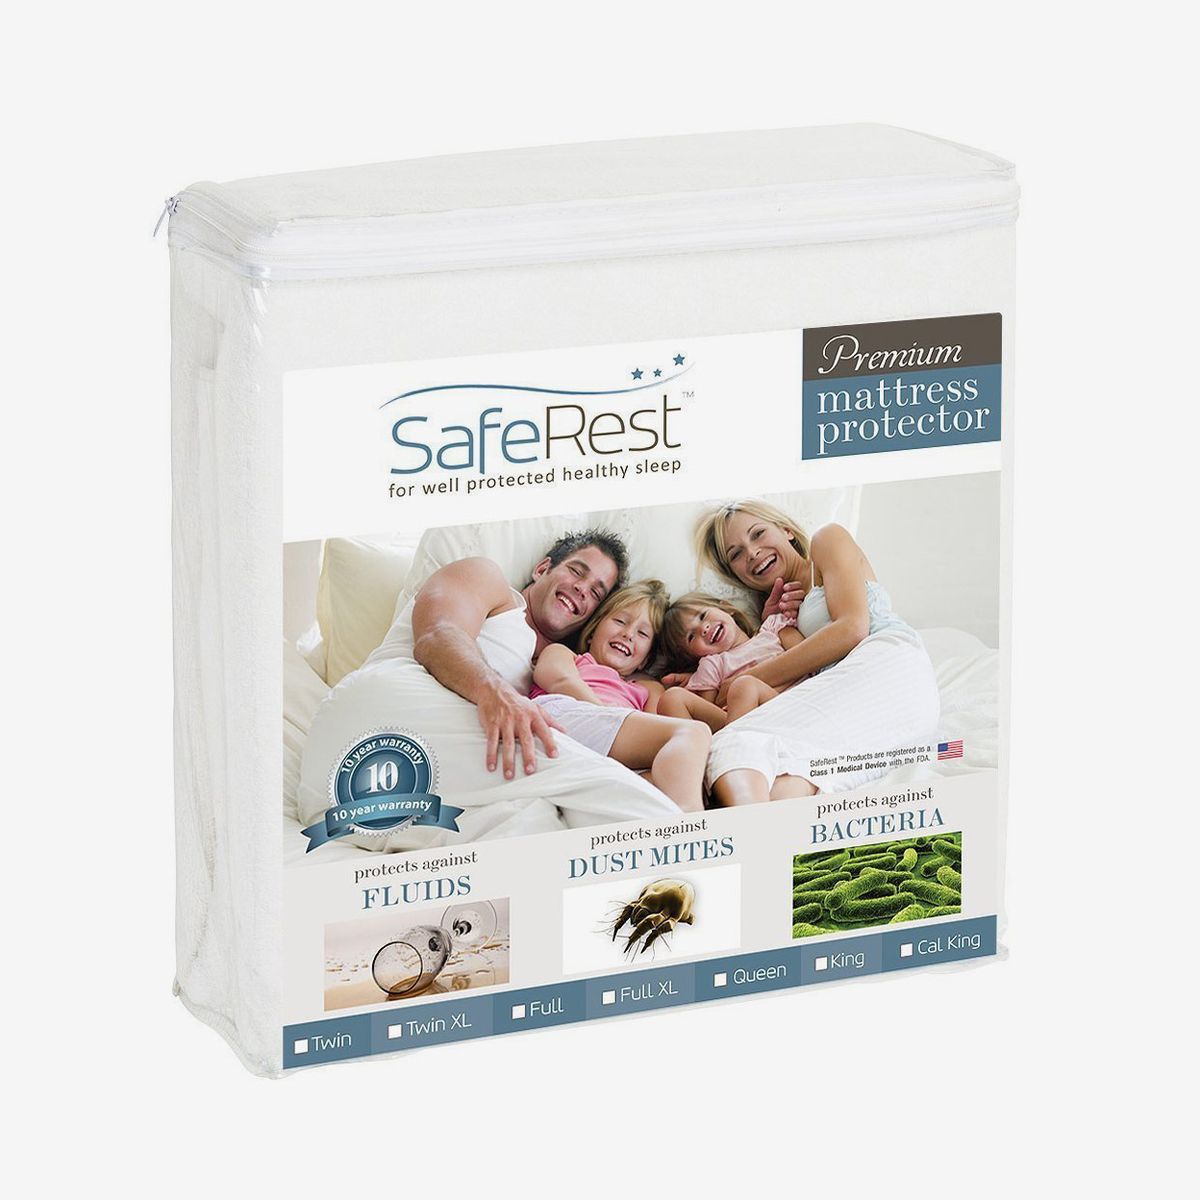 Water Proof Bed Cover Mattress Protector Single Protects your matress long time 